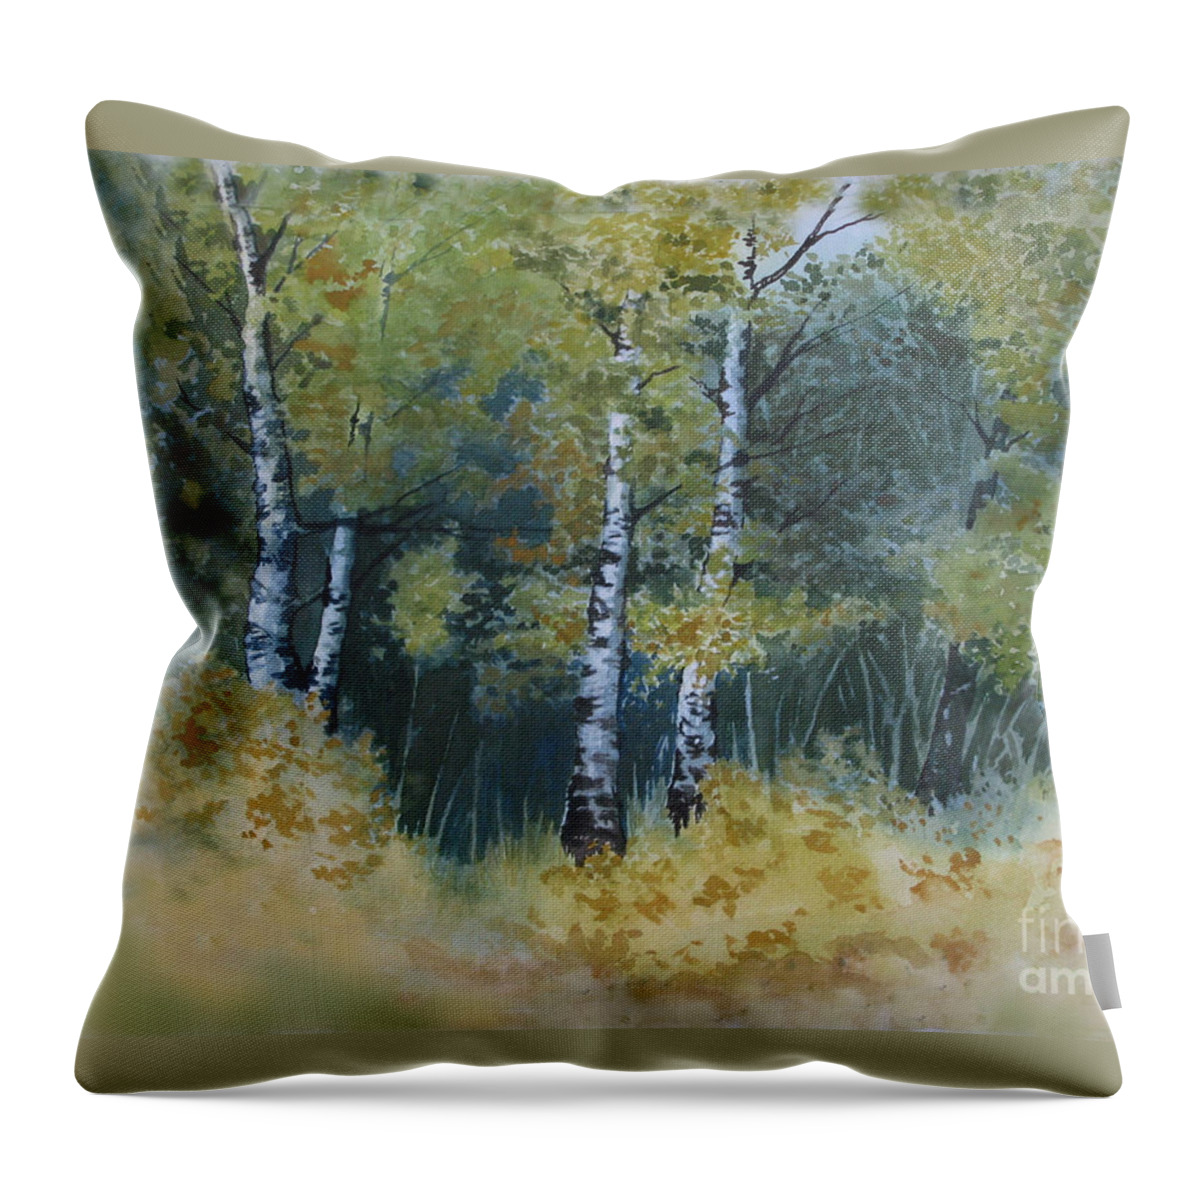 Birch Trees Throw Pillow featuring the painting Surrounded By Greenery by Diane Ellingham